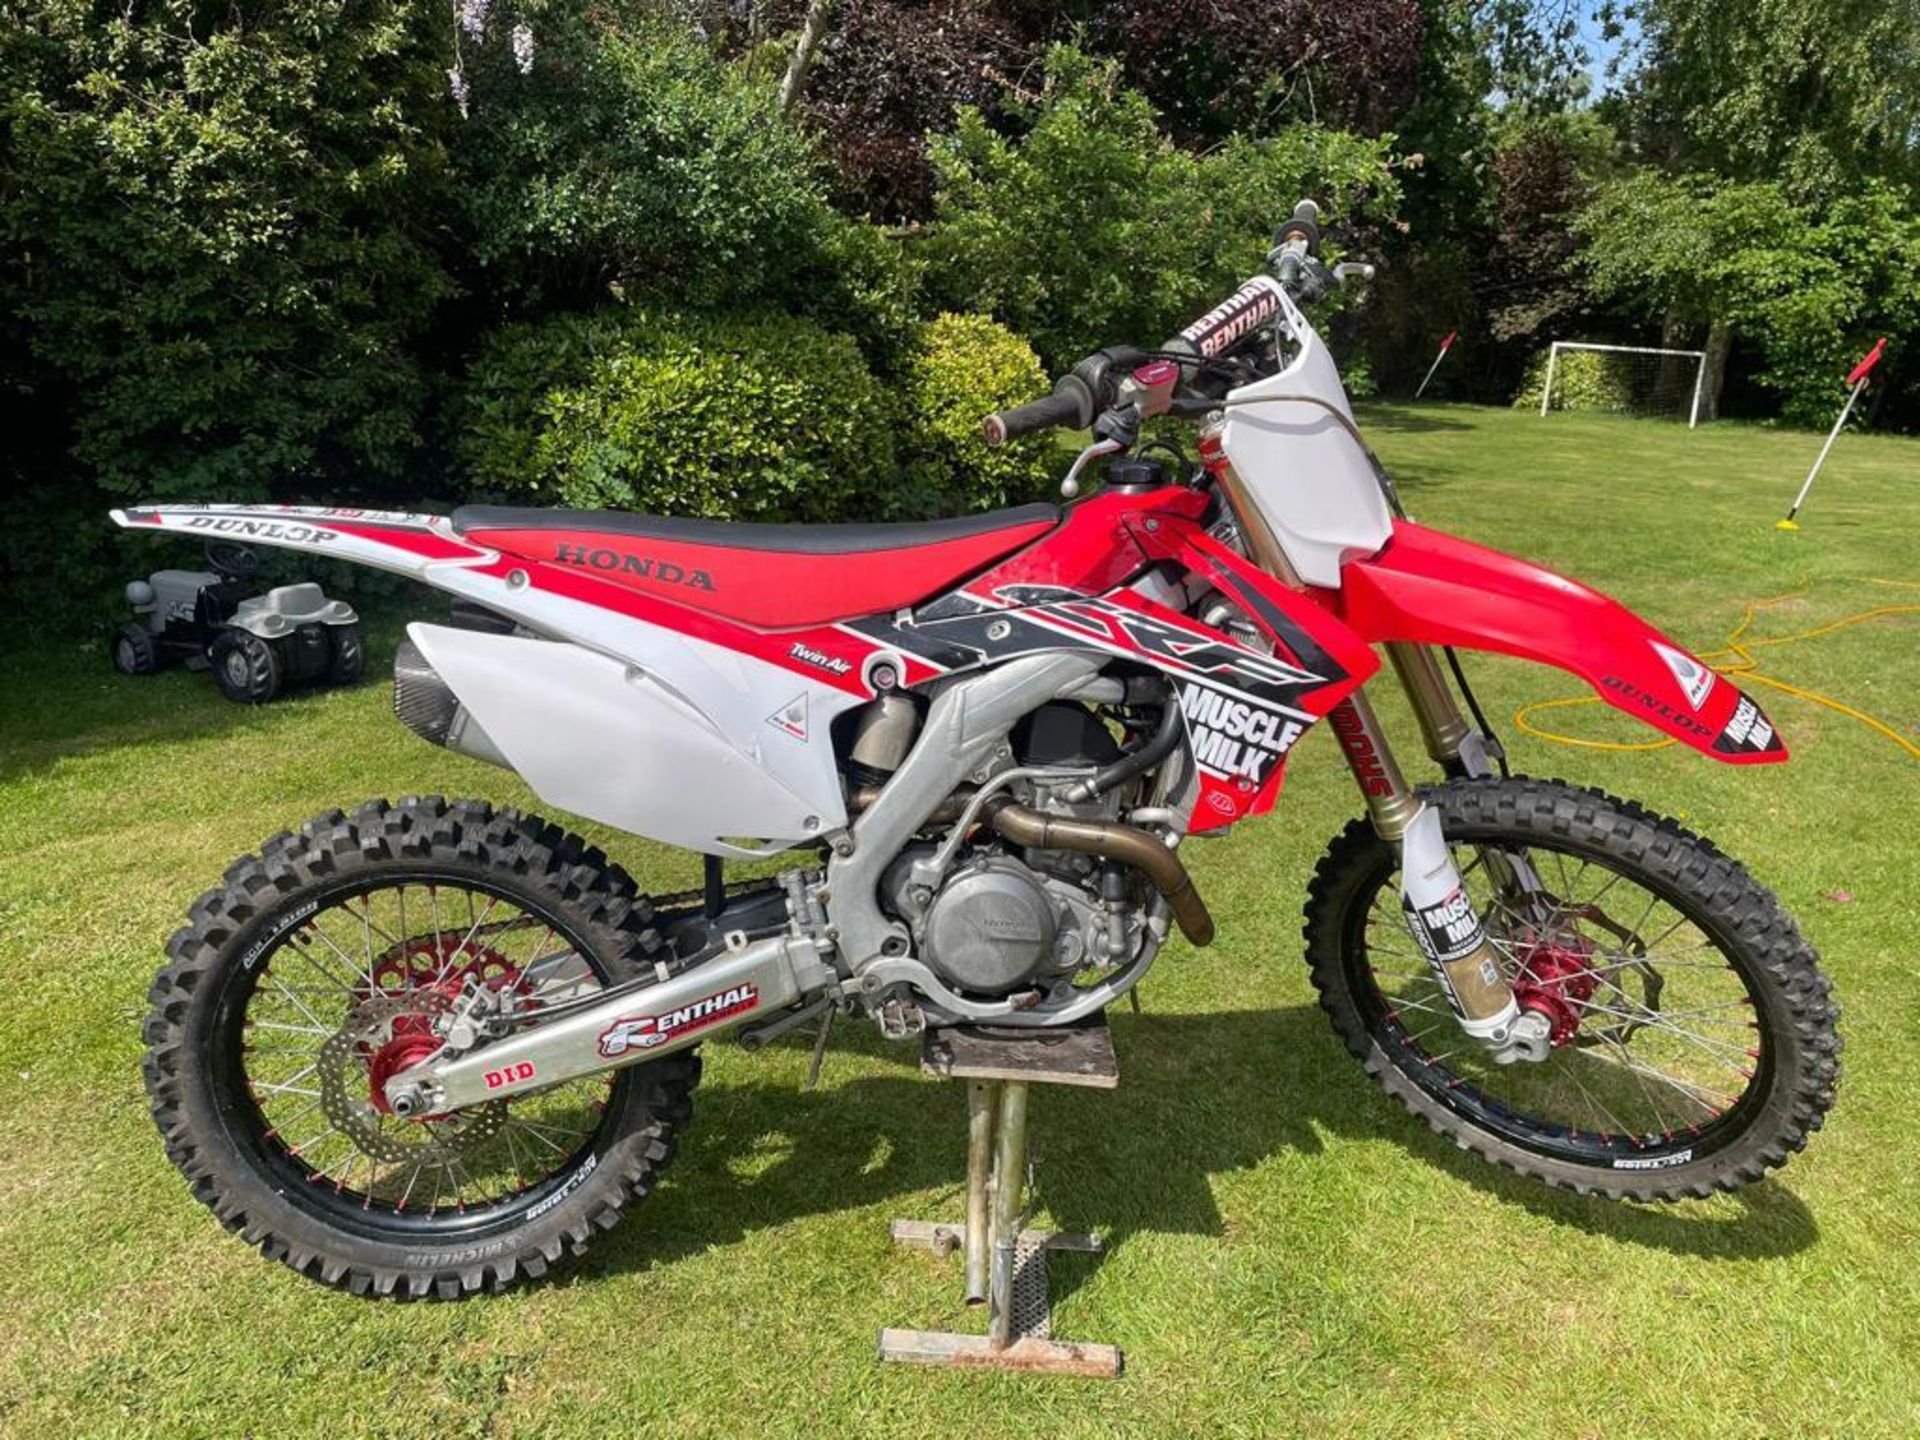 A 2014 HONDA CRF 450R MOTORCYCLE IN EXCELLENT CONDITION NO VAT UNFORTUNATELY DUE TO UNFORSEEN